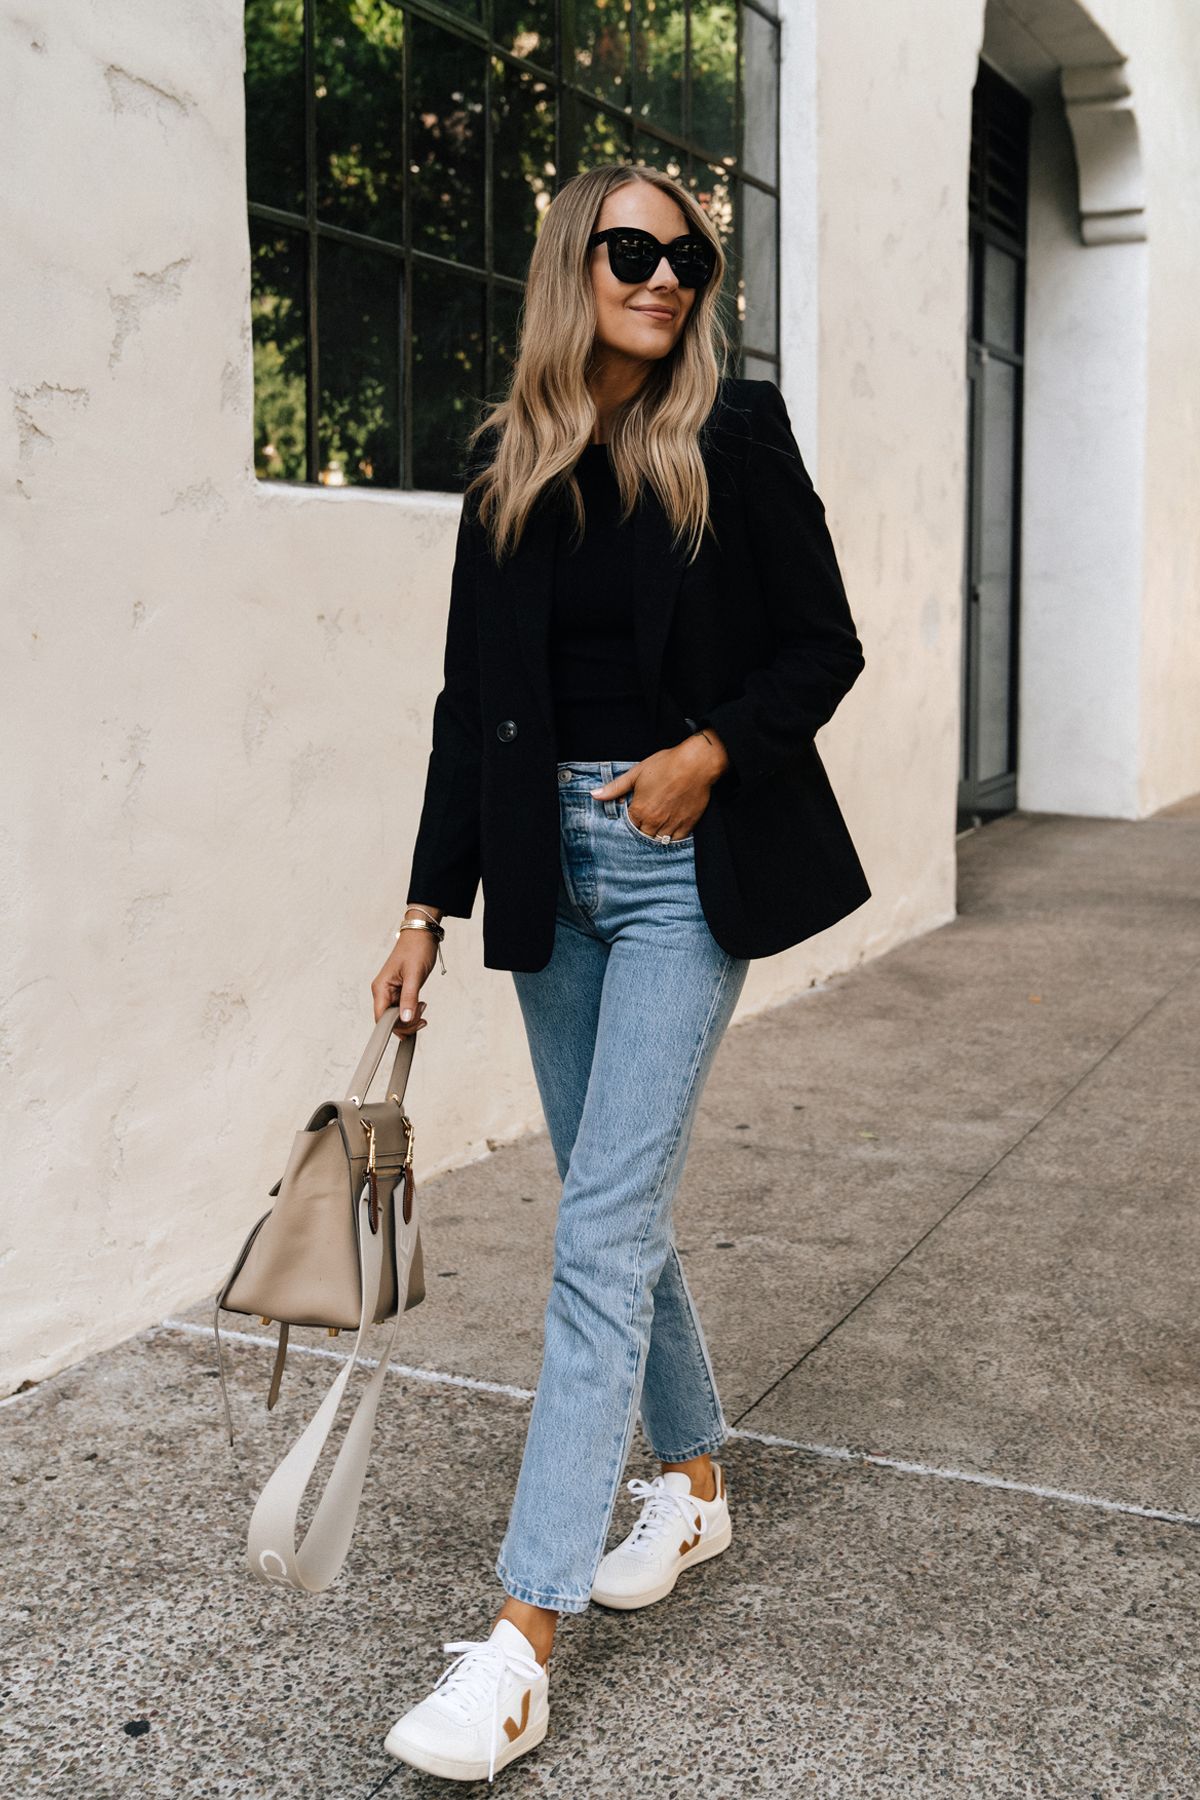 Chic Blazer With Jeans for Casual Sophistication